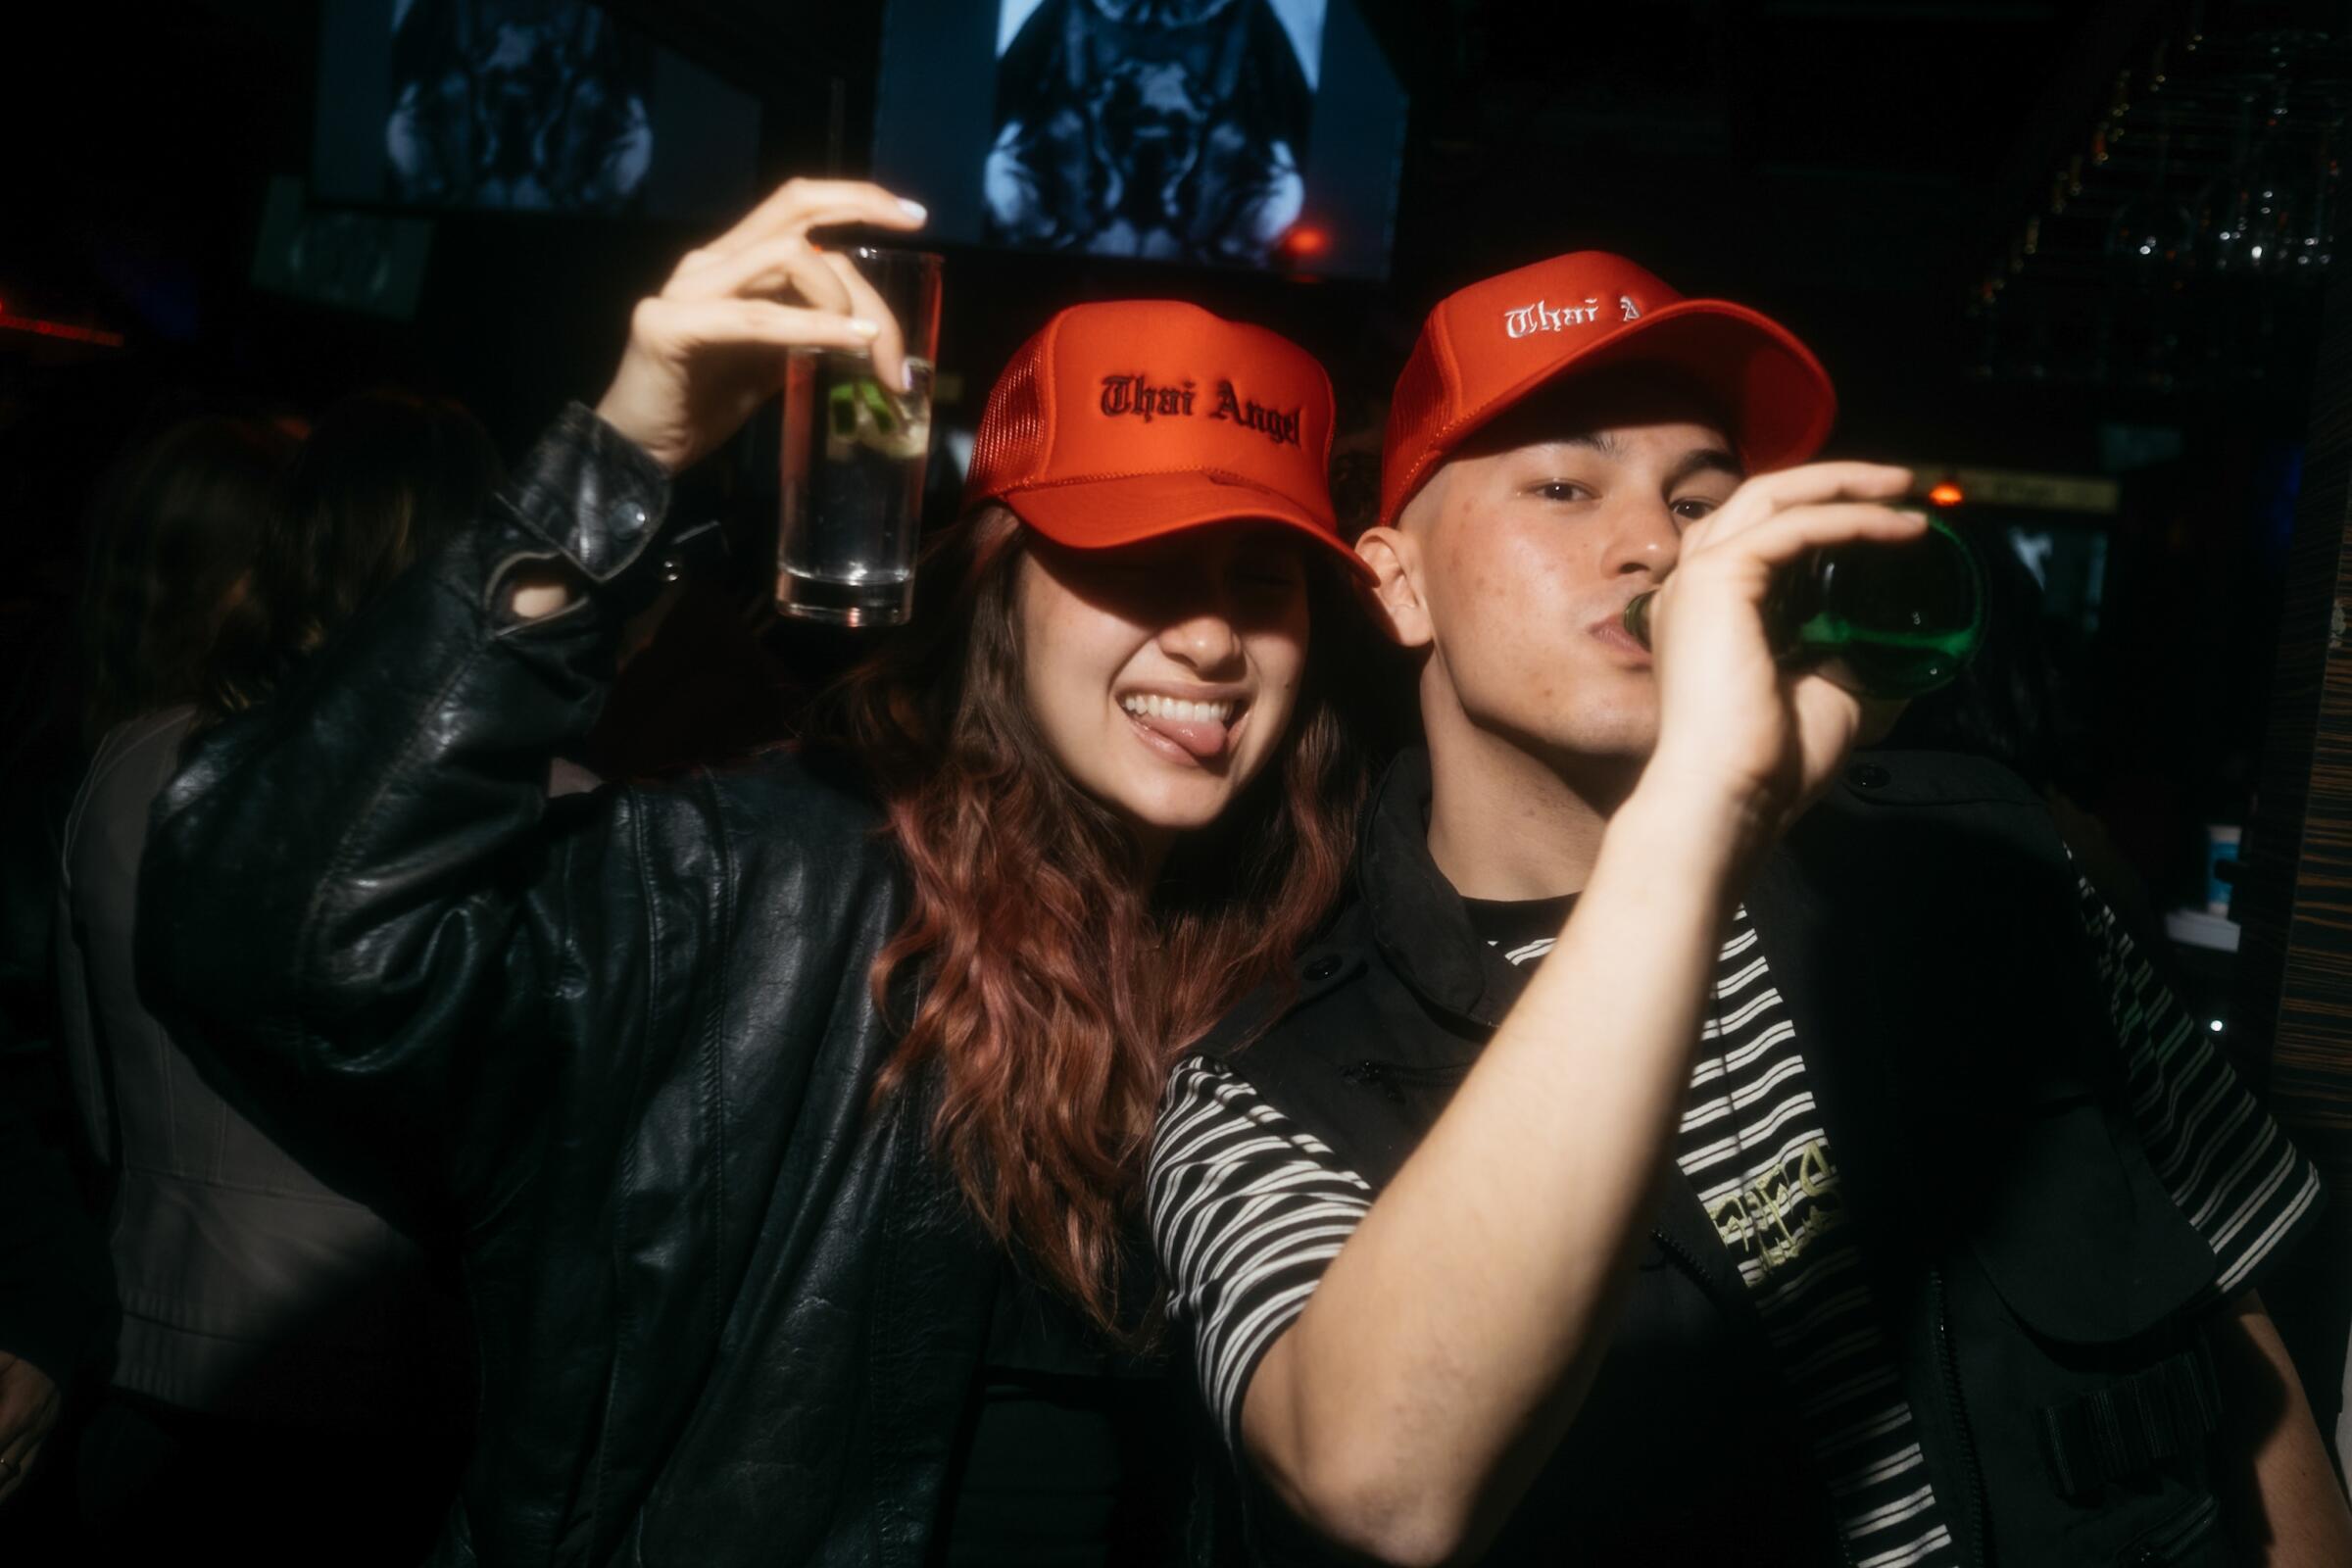 A couple wears red trucker hats that say "Thai Angel" as one drinks from a beer bottle and another holds their drink up.